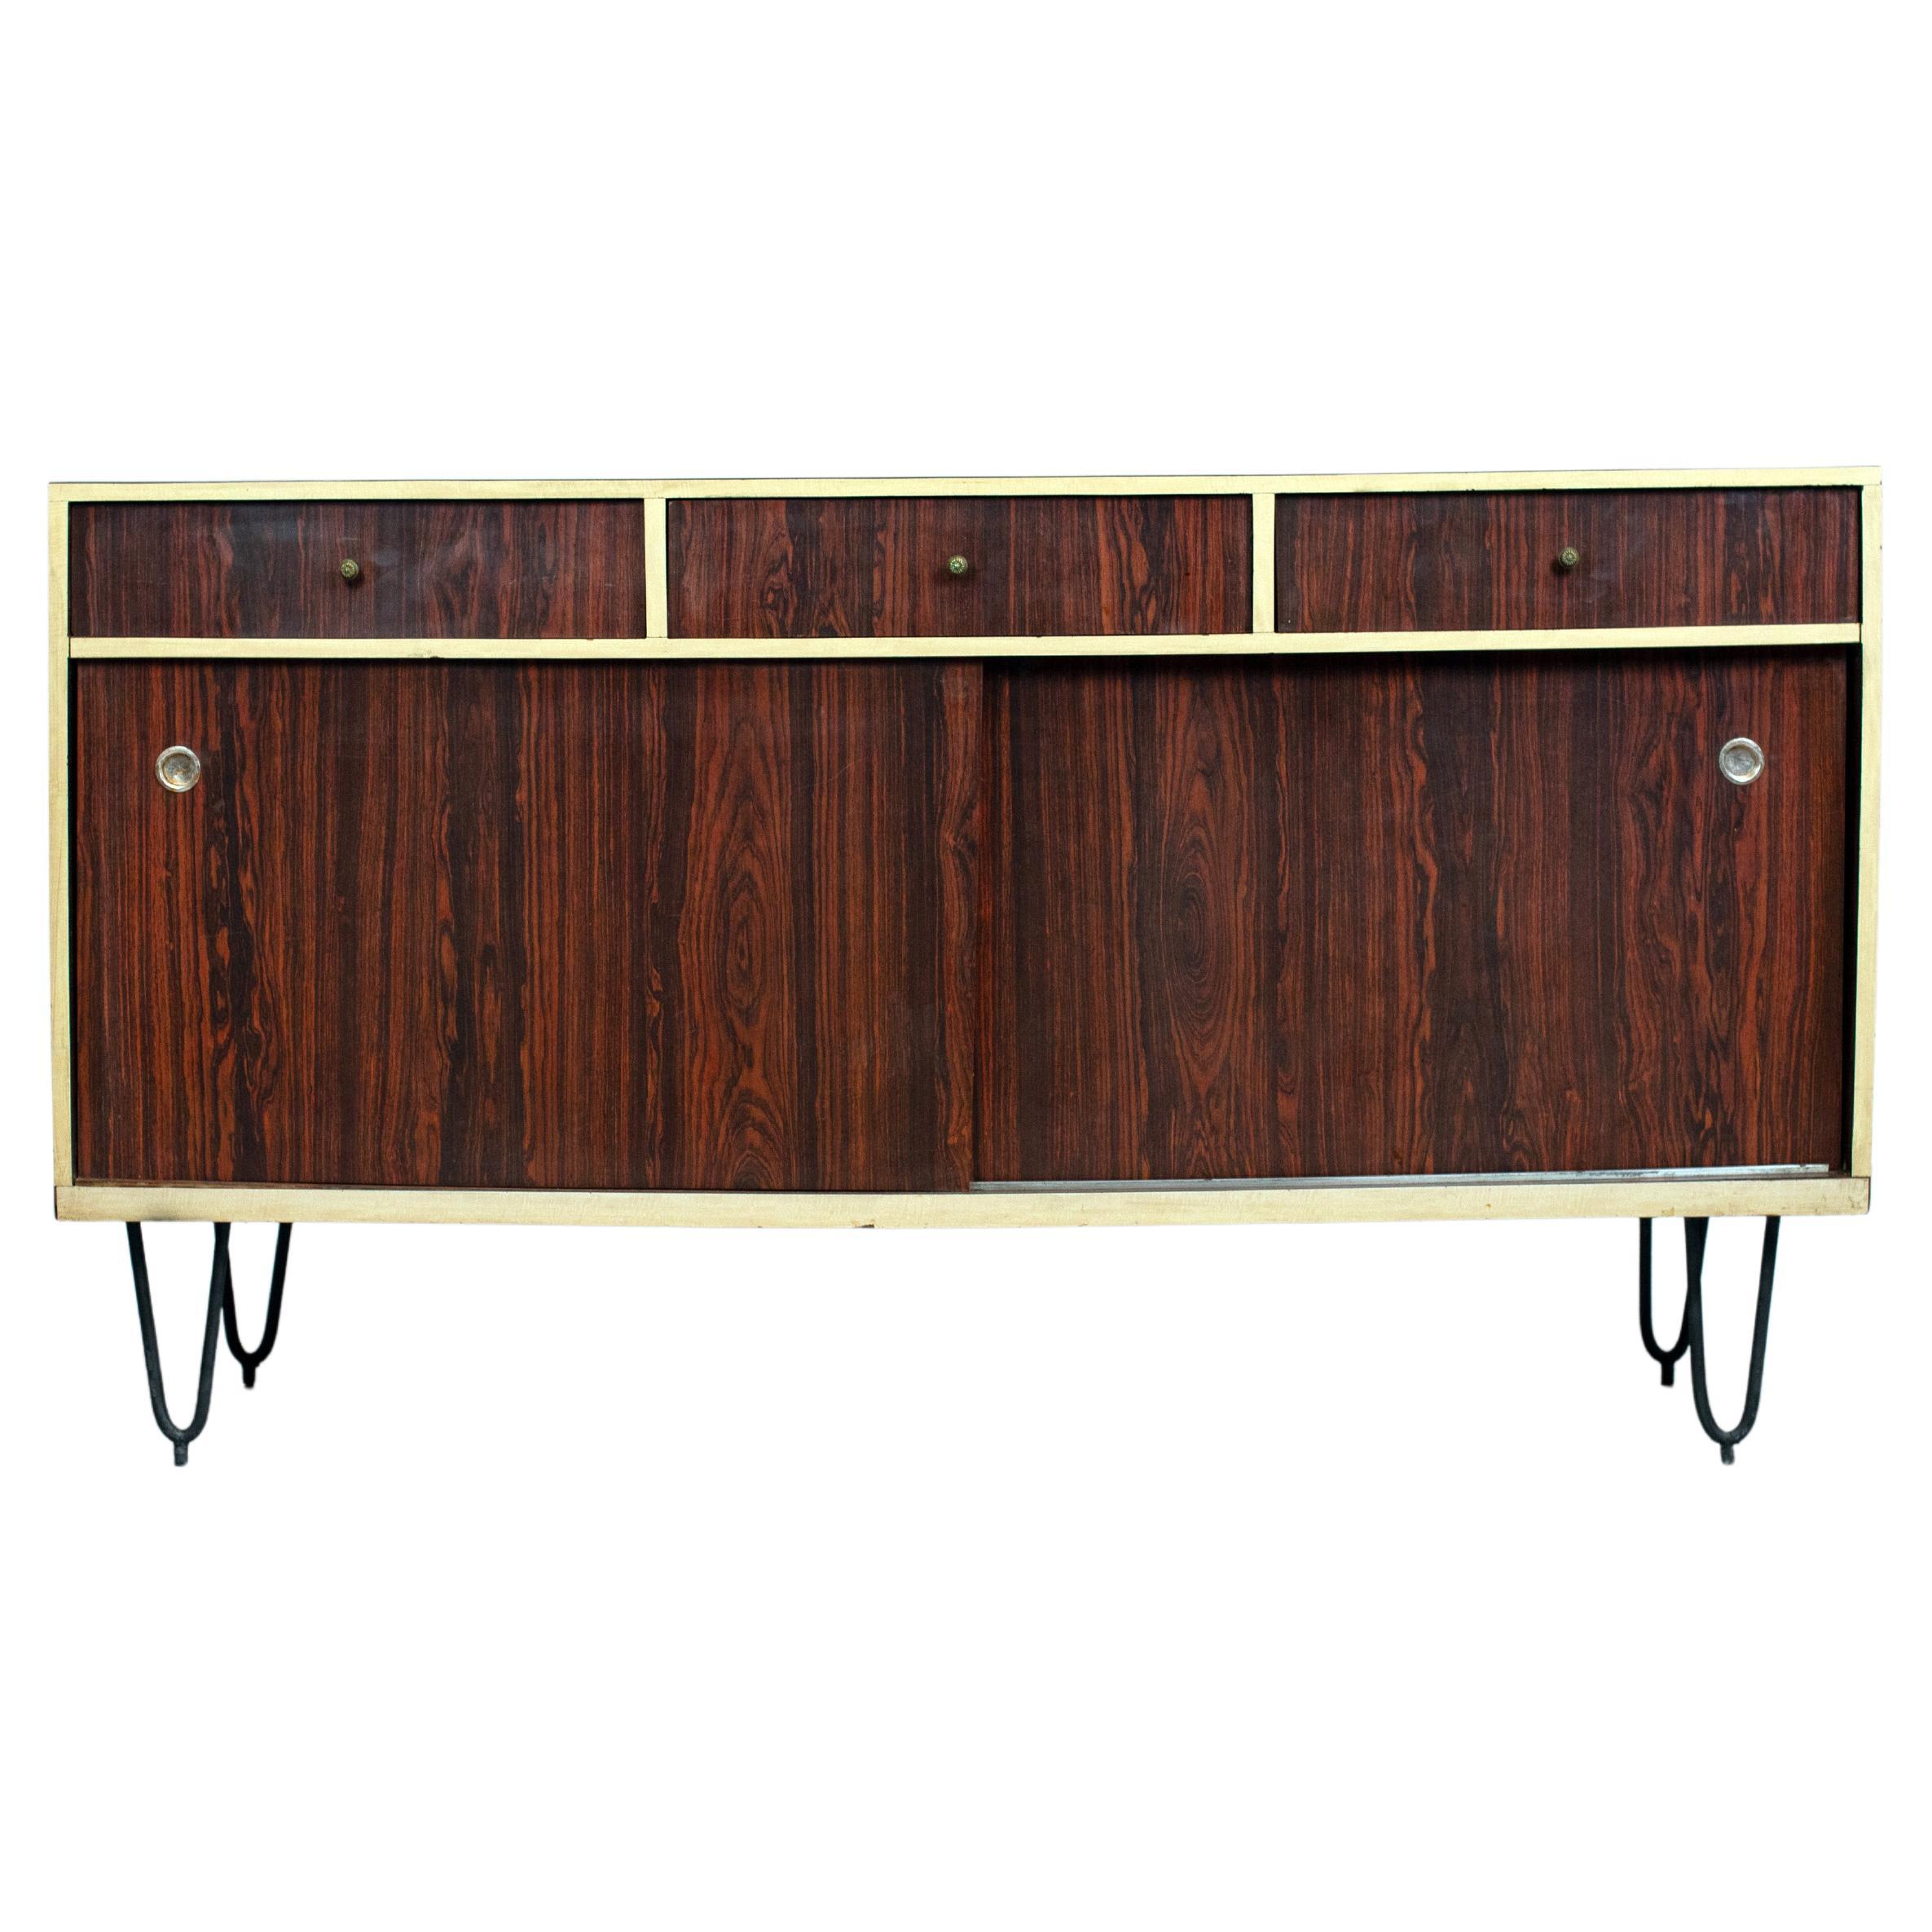 Brazilian Design, Buffet, C. 1950 Wood, Formica and Metal For Sale